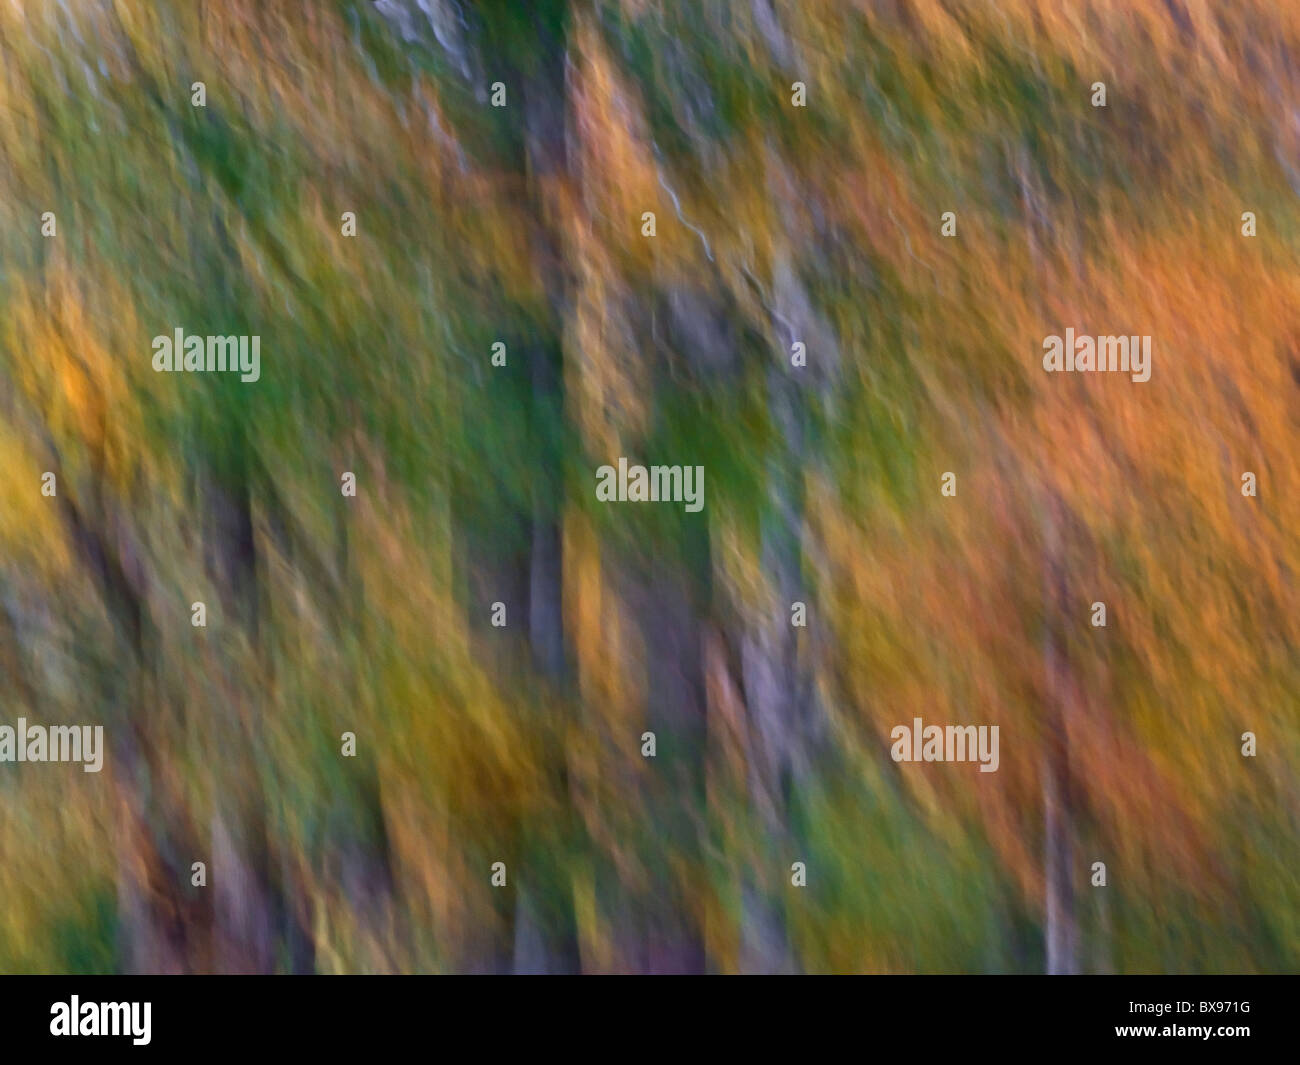 Dream-like blurry view of a forest in Autumn with colorful leaves in green orange and red and the feeling of movement as if we are driving by it. Stock Photo